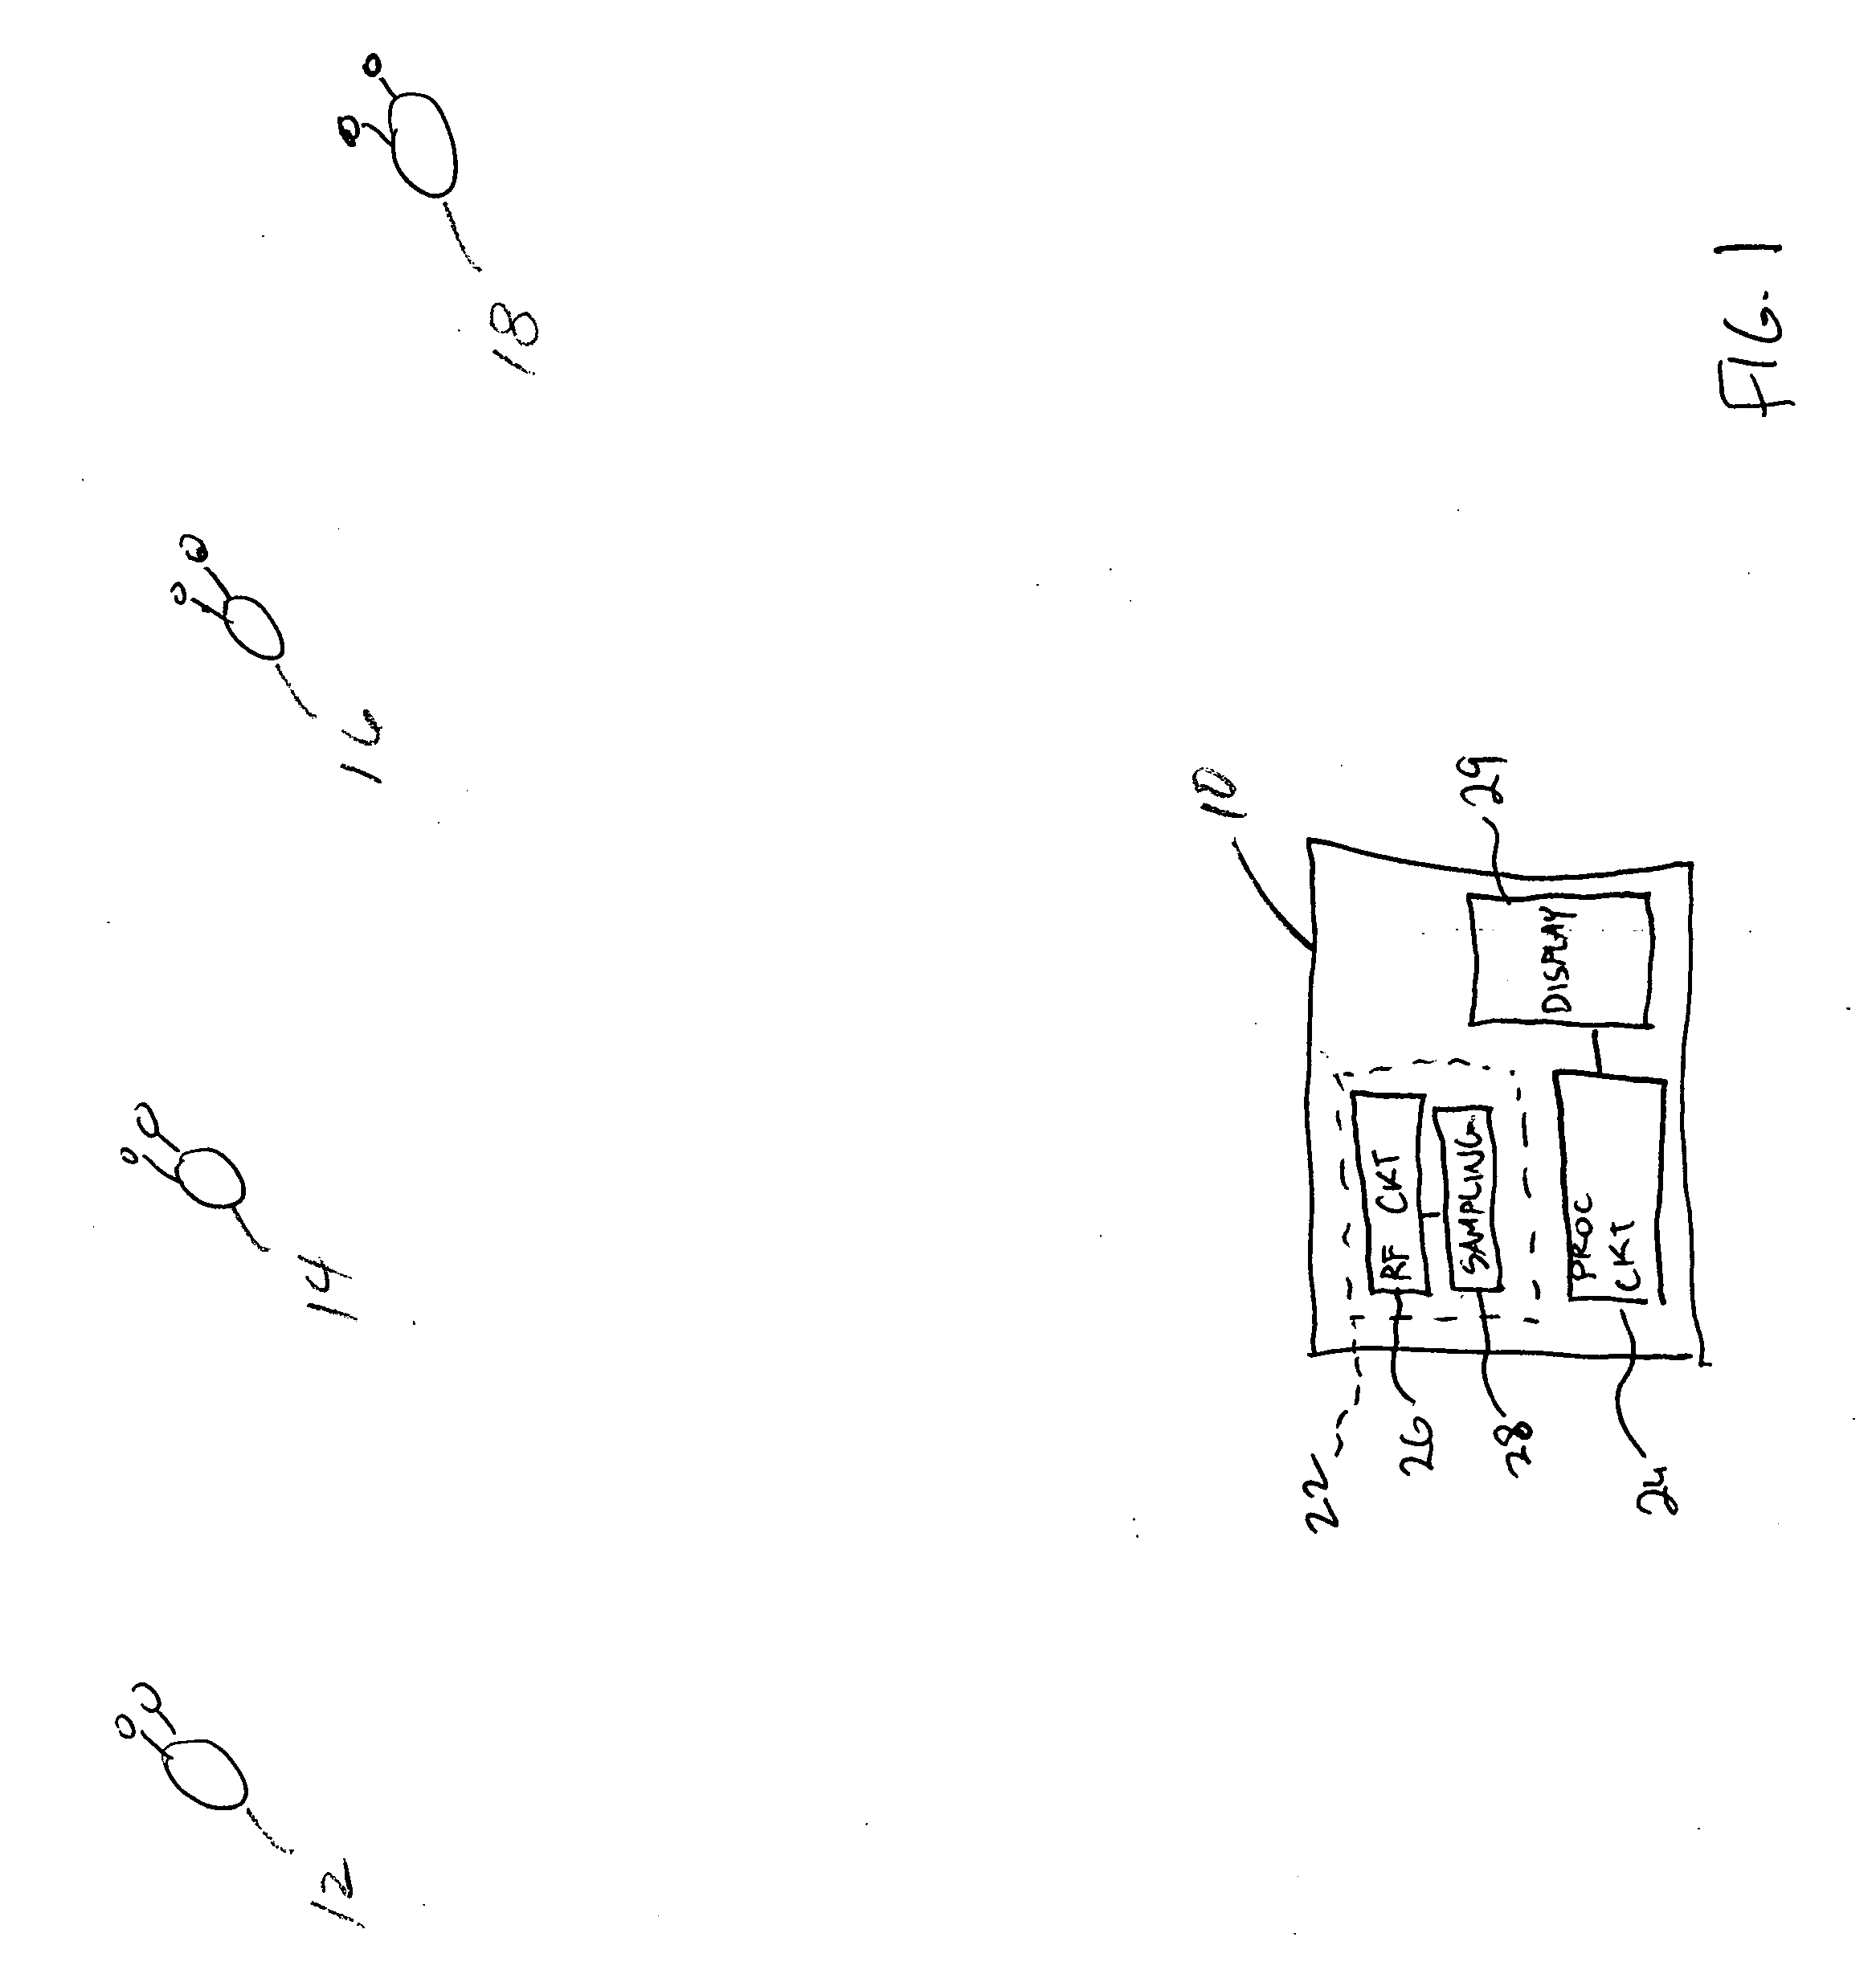 System and method for acquiring weak signals in a global positioning satellite system